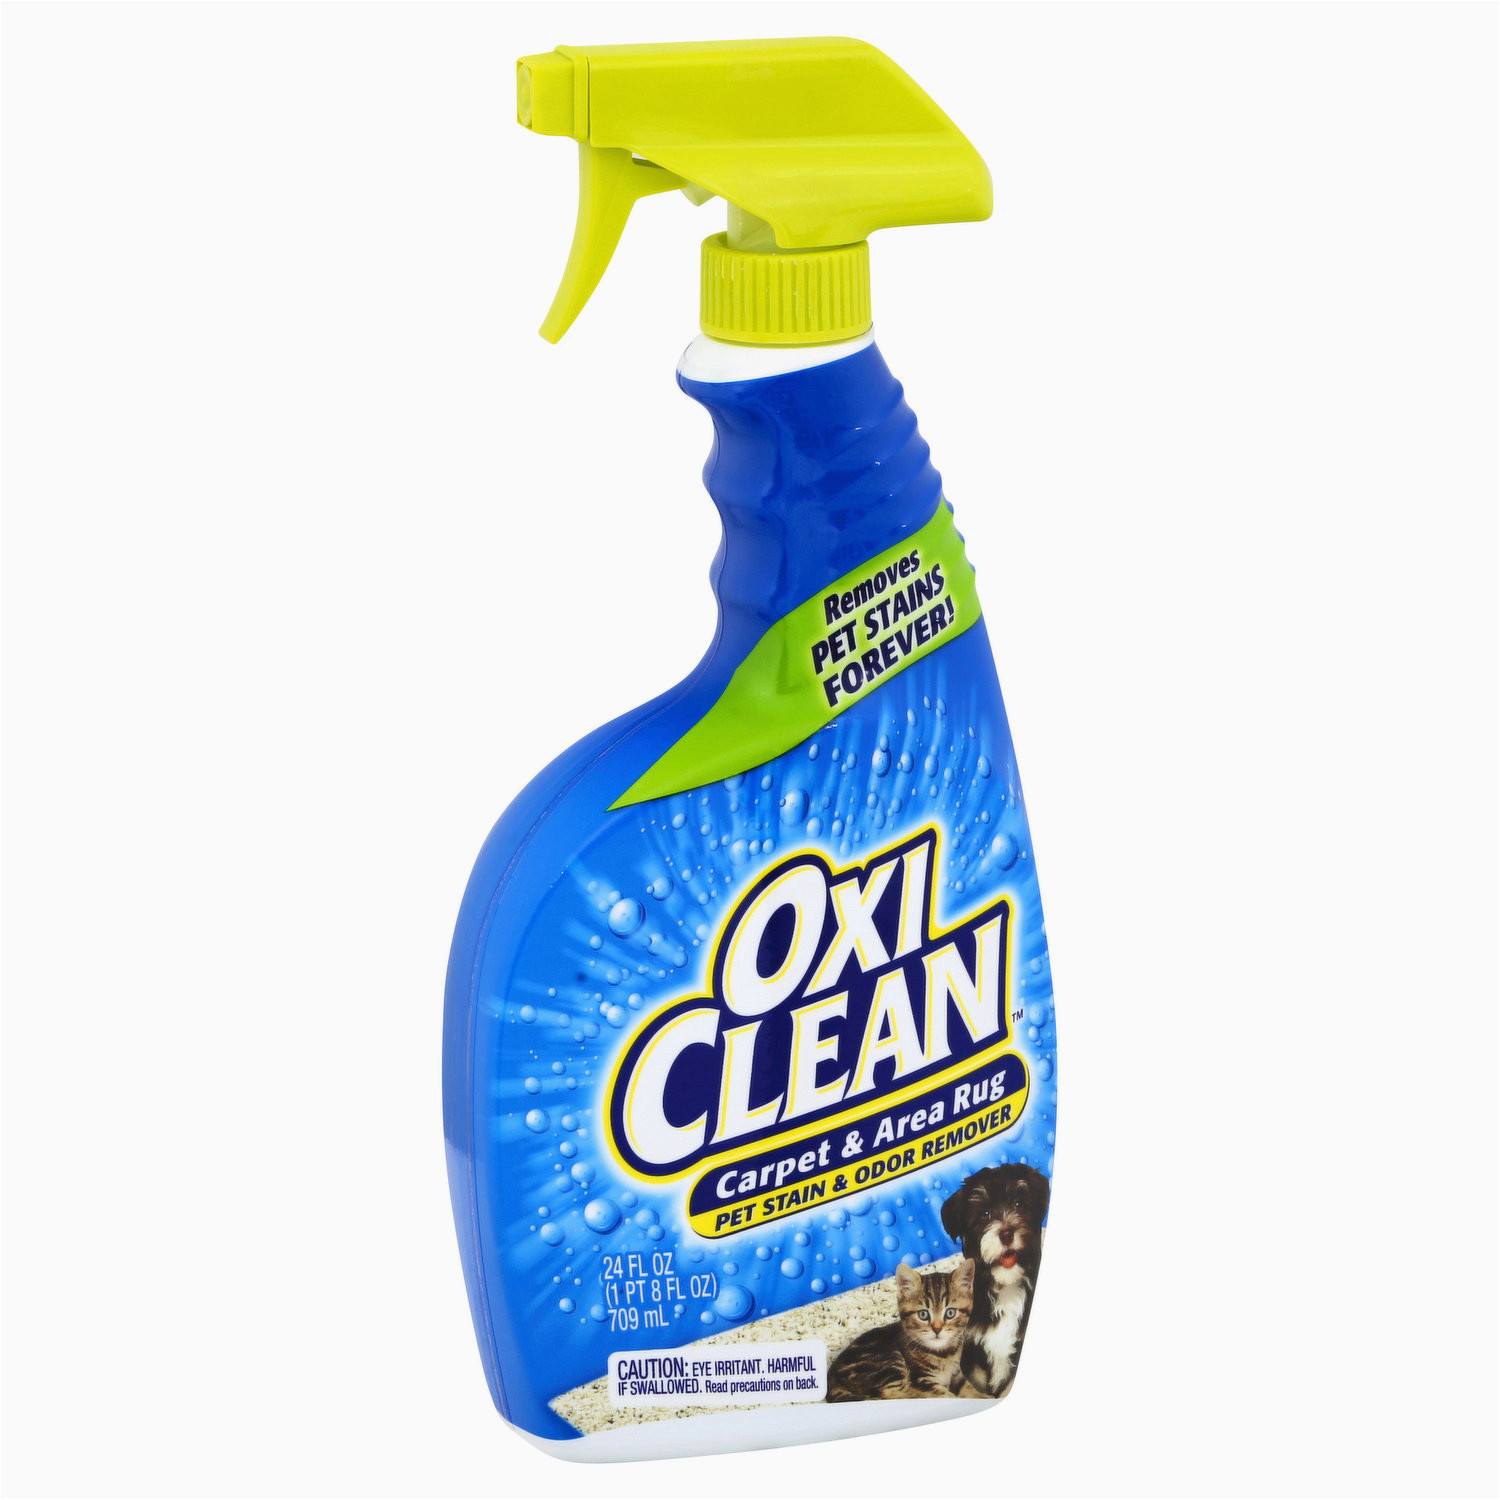 Oxiclean Carpet and area Rug Oxiclean Pet Stain & Odor Remover, Carpet & area Rug